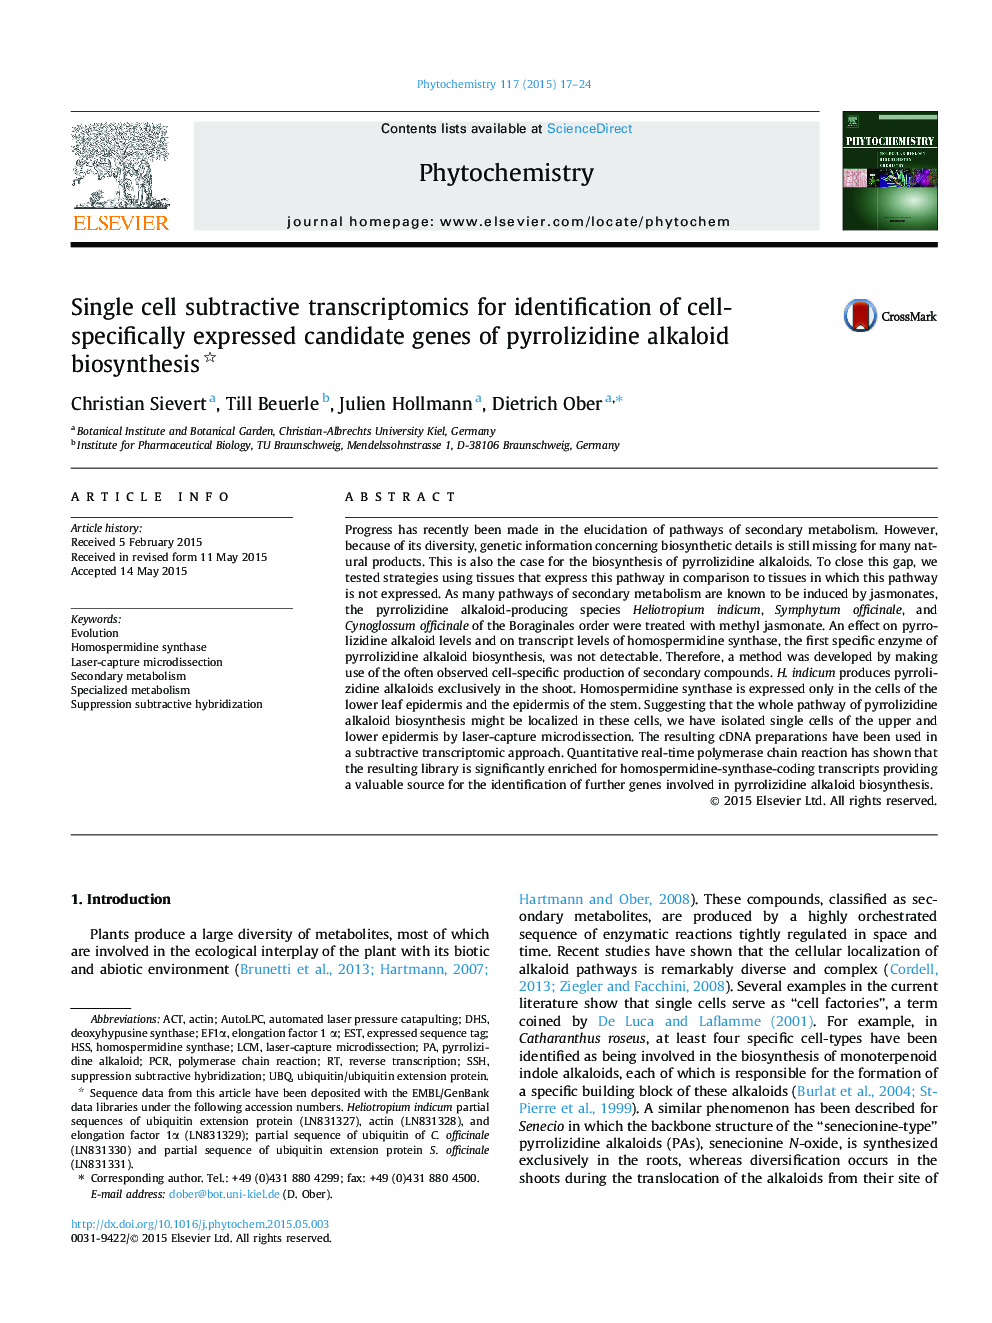 Single cell subtractive transcriptomics for identification of cell-specifically expressed candidate genes of pyrrolizidine alkaloid biosynthesis